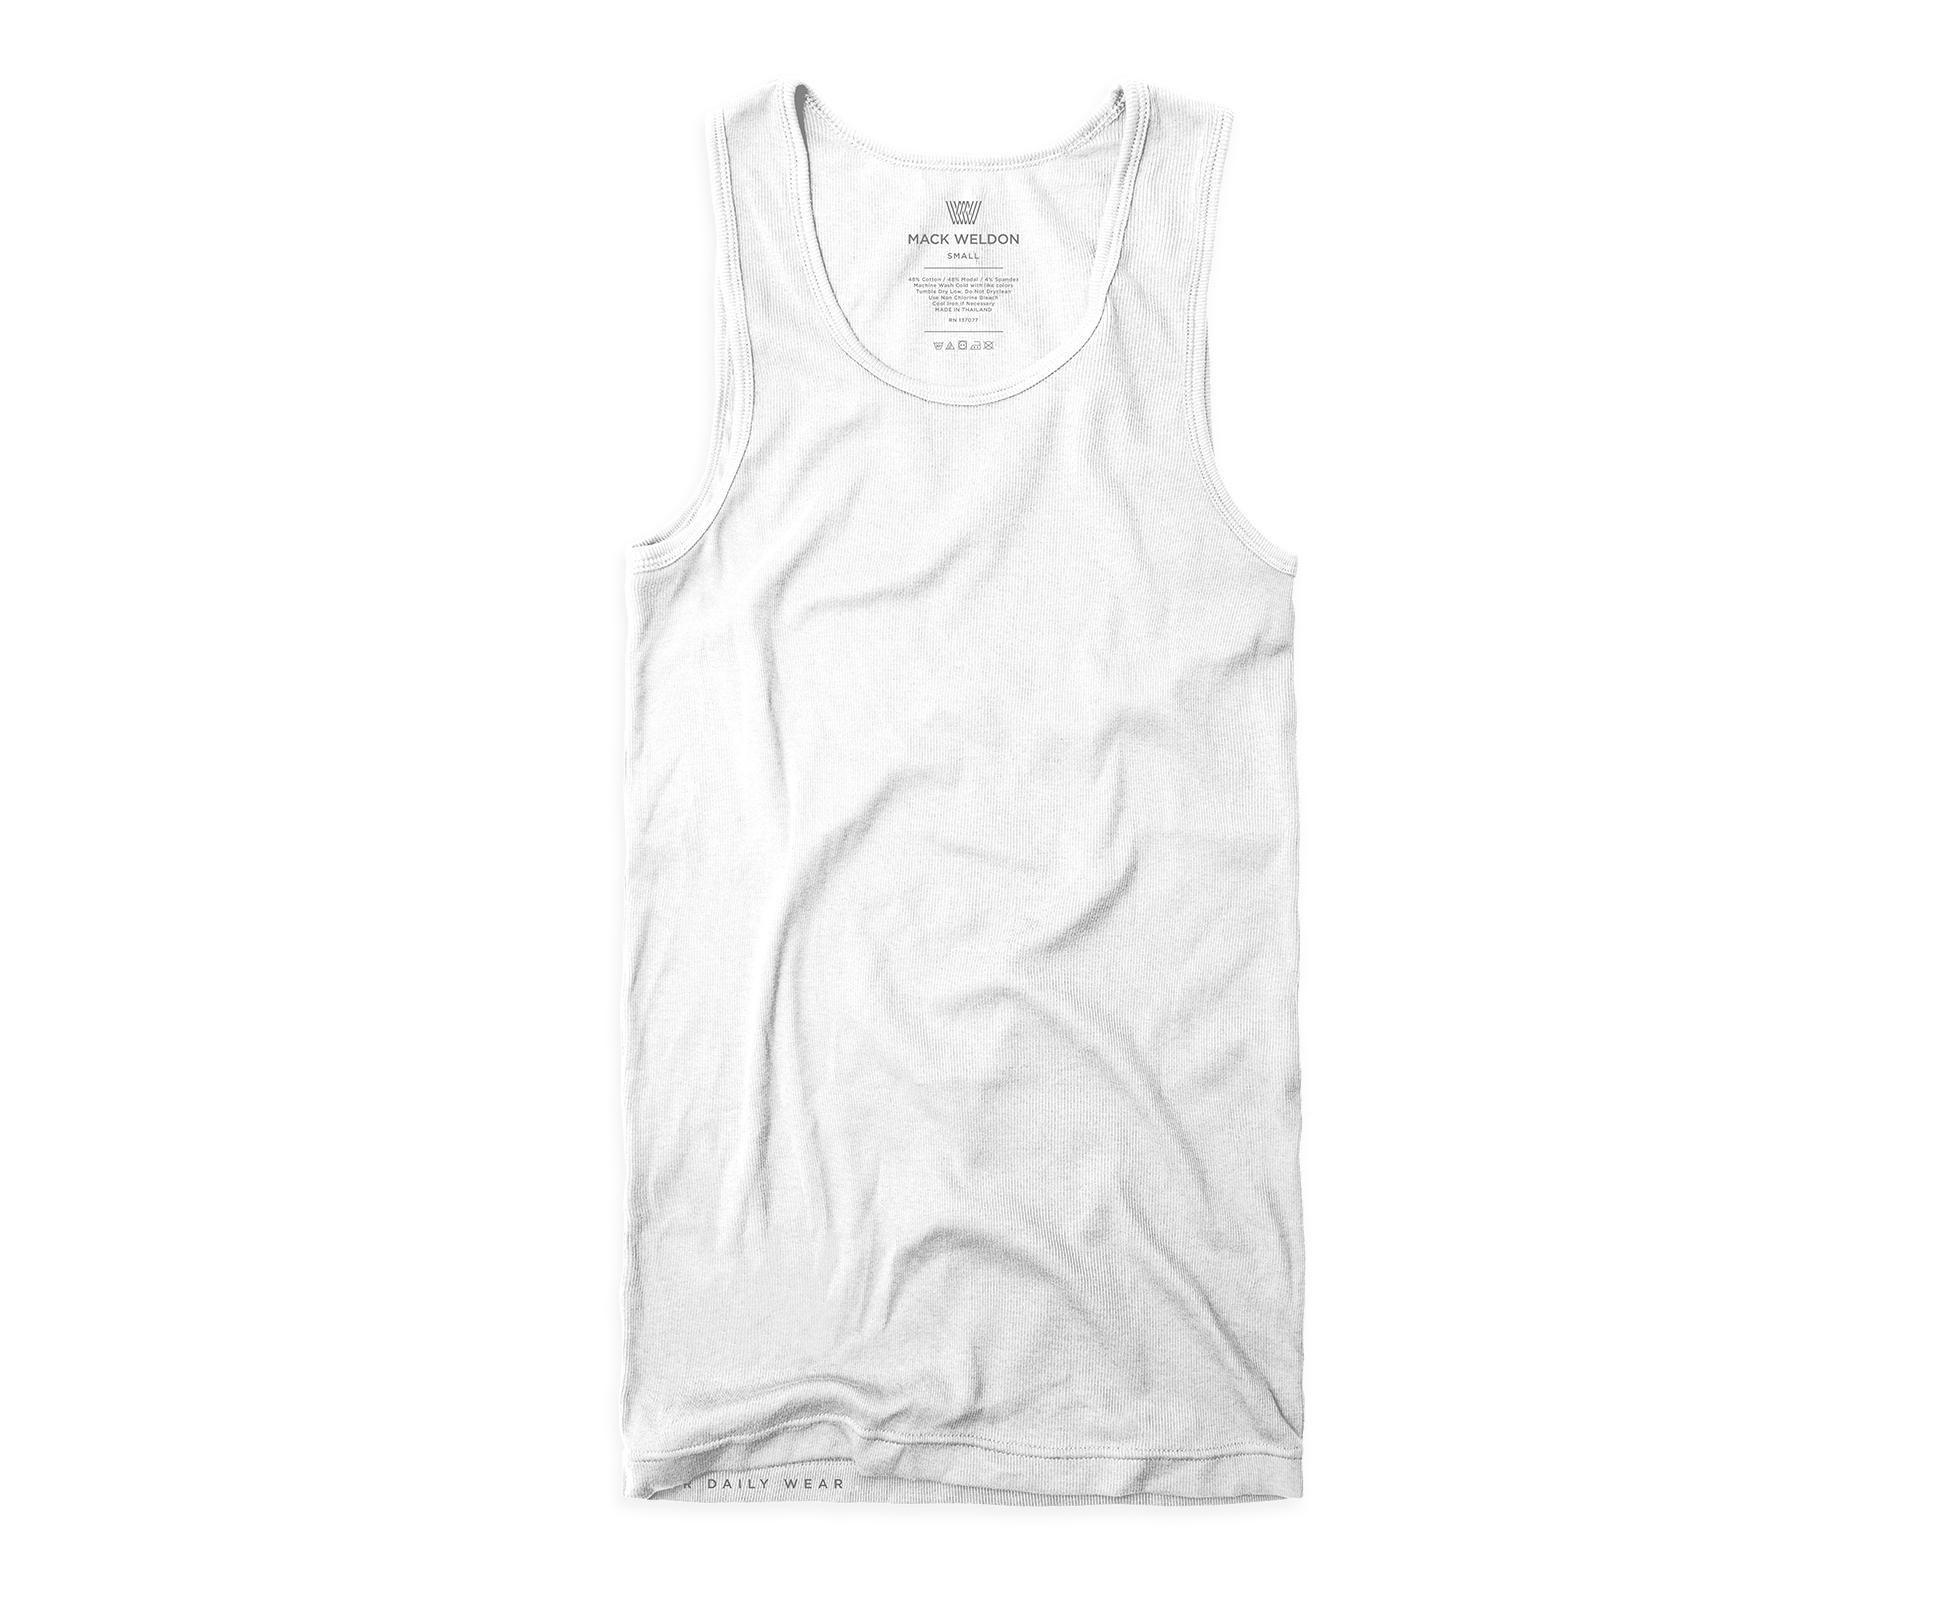 How To Wash White Tank Tops?